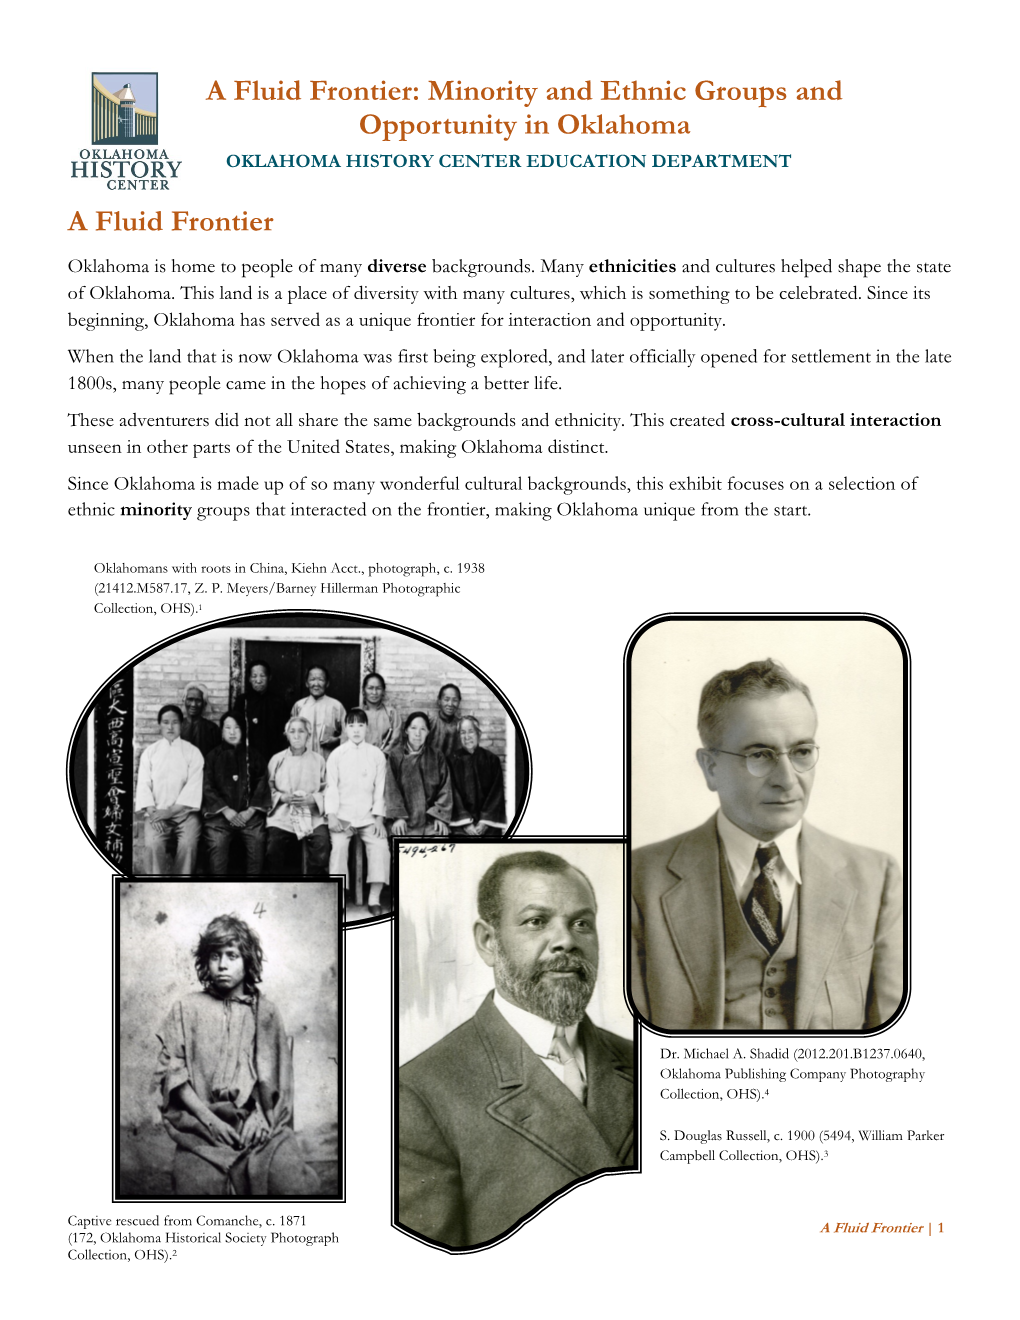 A Fluid Frontier: Minority and Ethnic Groups and Opportunity in Oklahoma OKLAHOMA HISTORY CENTER EDUCATION DEPARTMENT